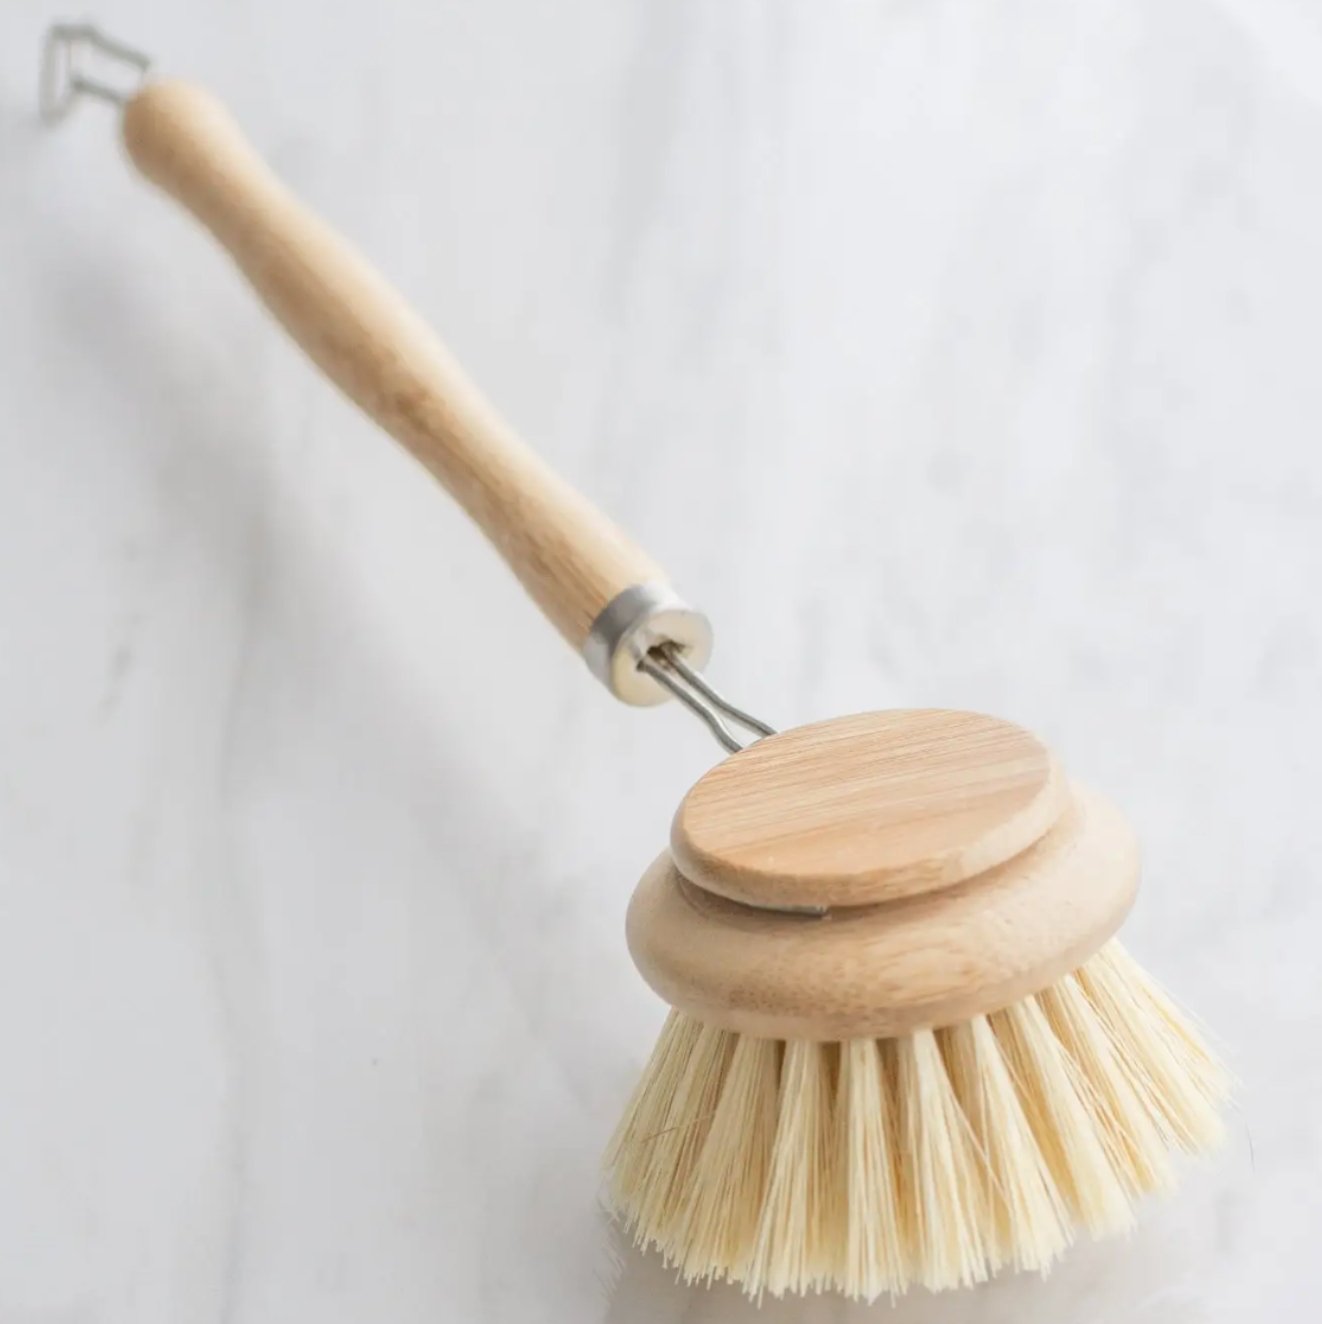 Long Handle Wooden Dish Brush with Replaceable Head - Hello Norden